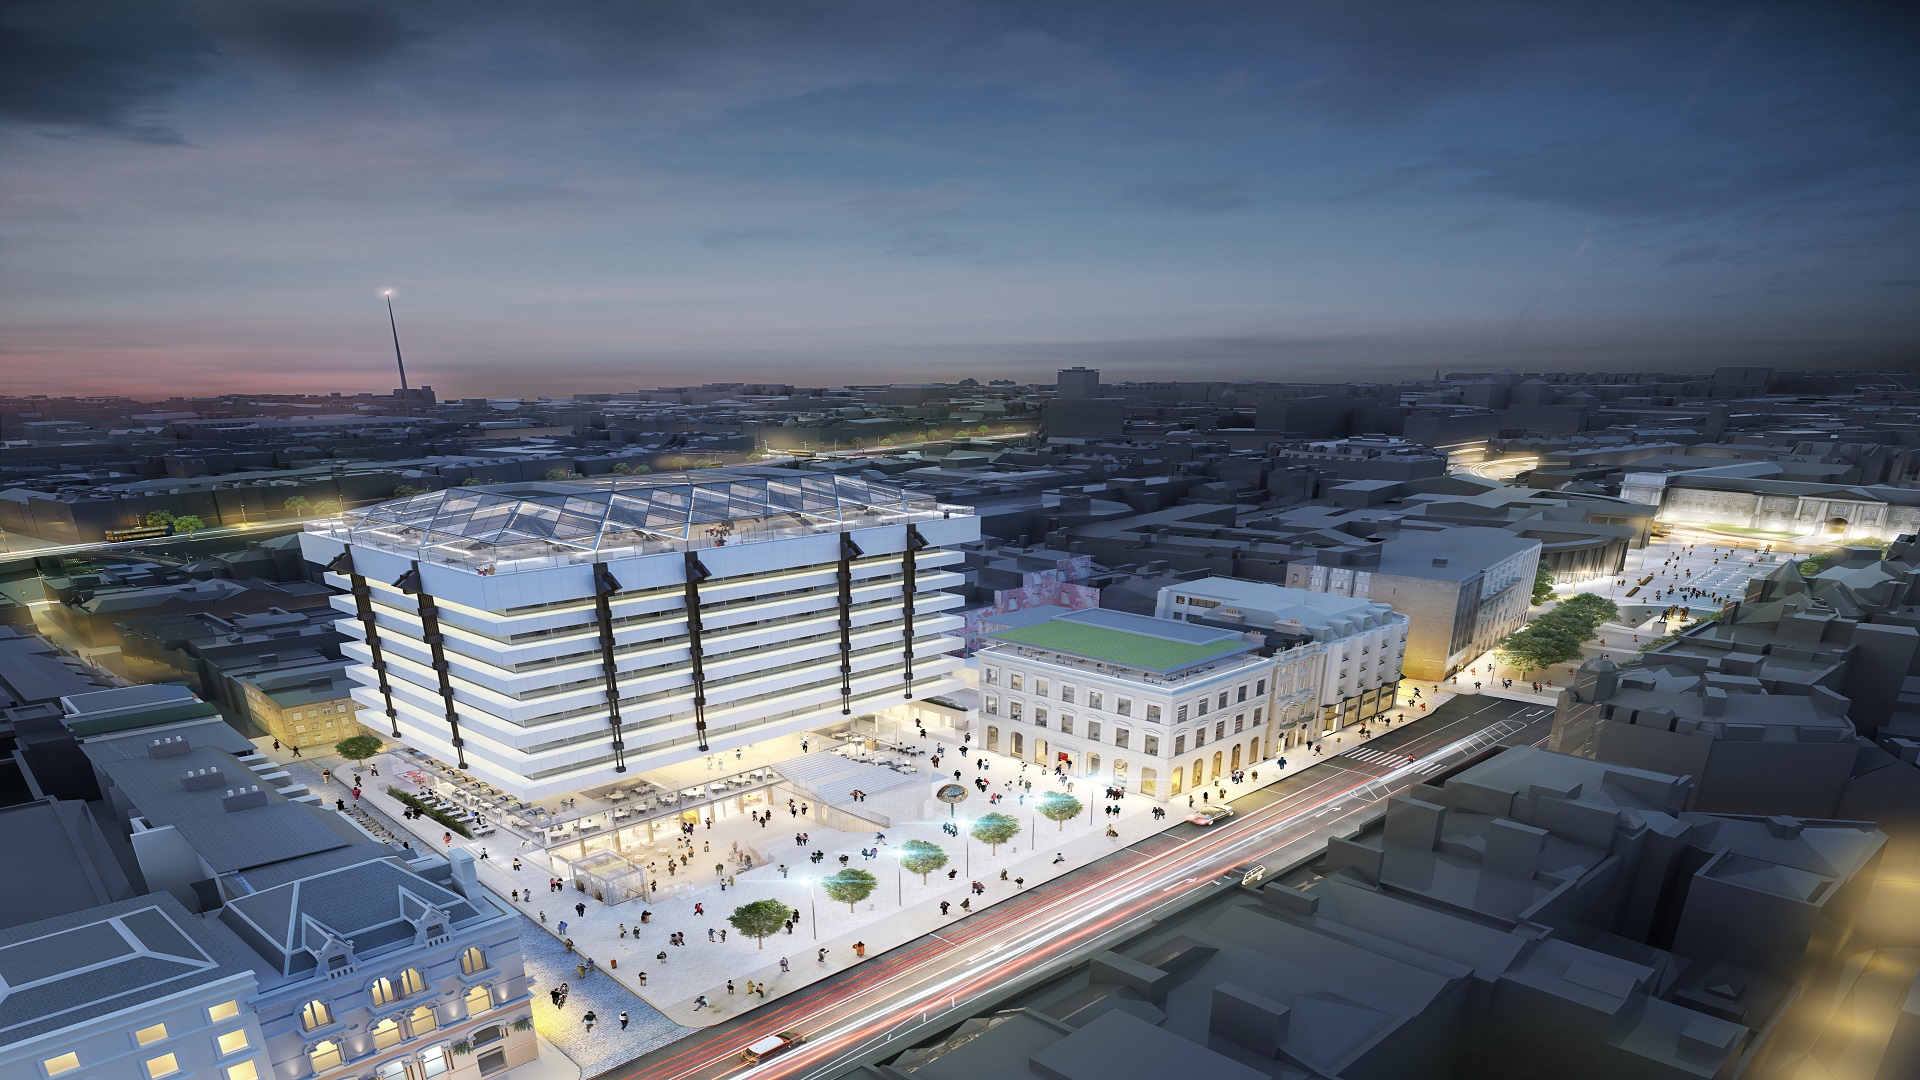 Planning Permission Approved for Landmark Central Plaza Project